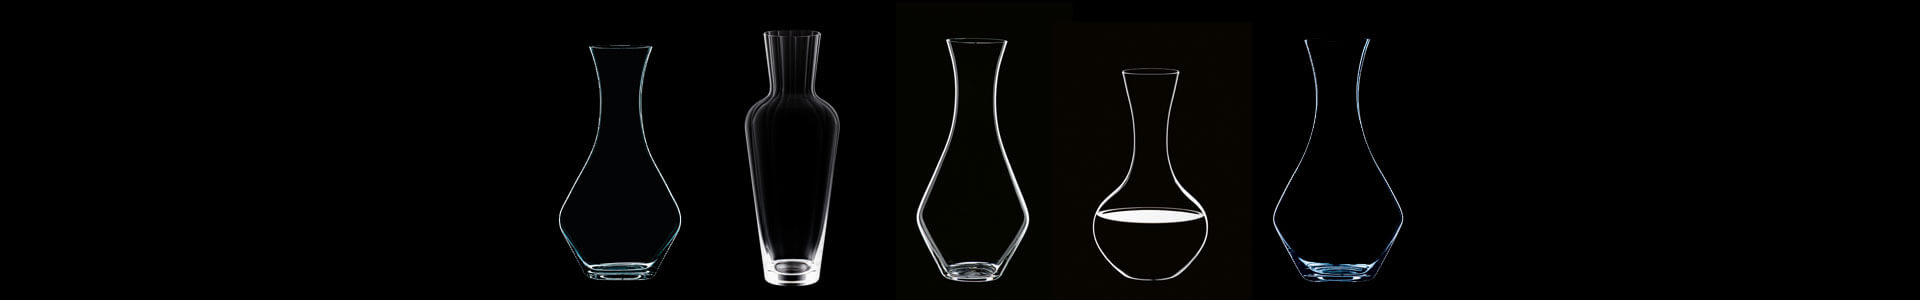 Riedel decanters of various shapes are depicted as silhouettes against a black background.